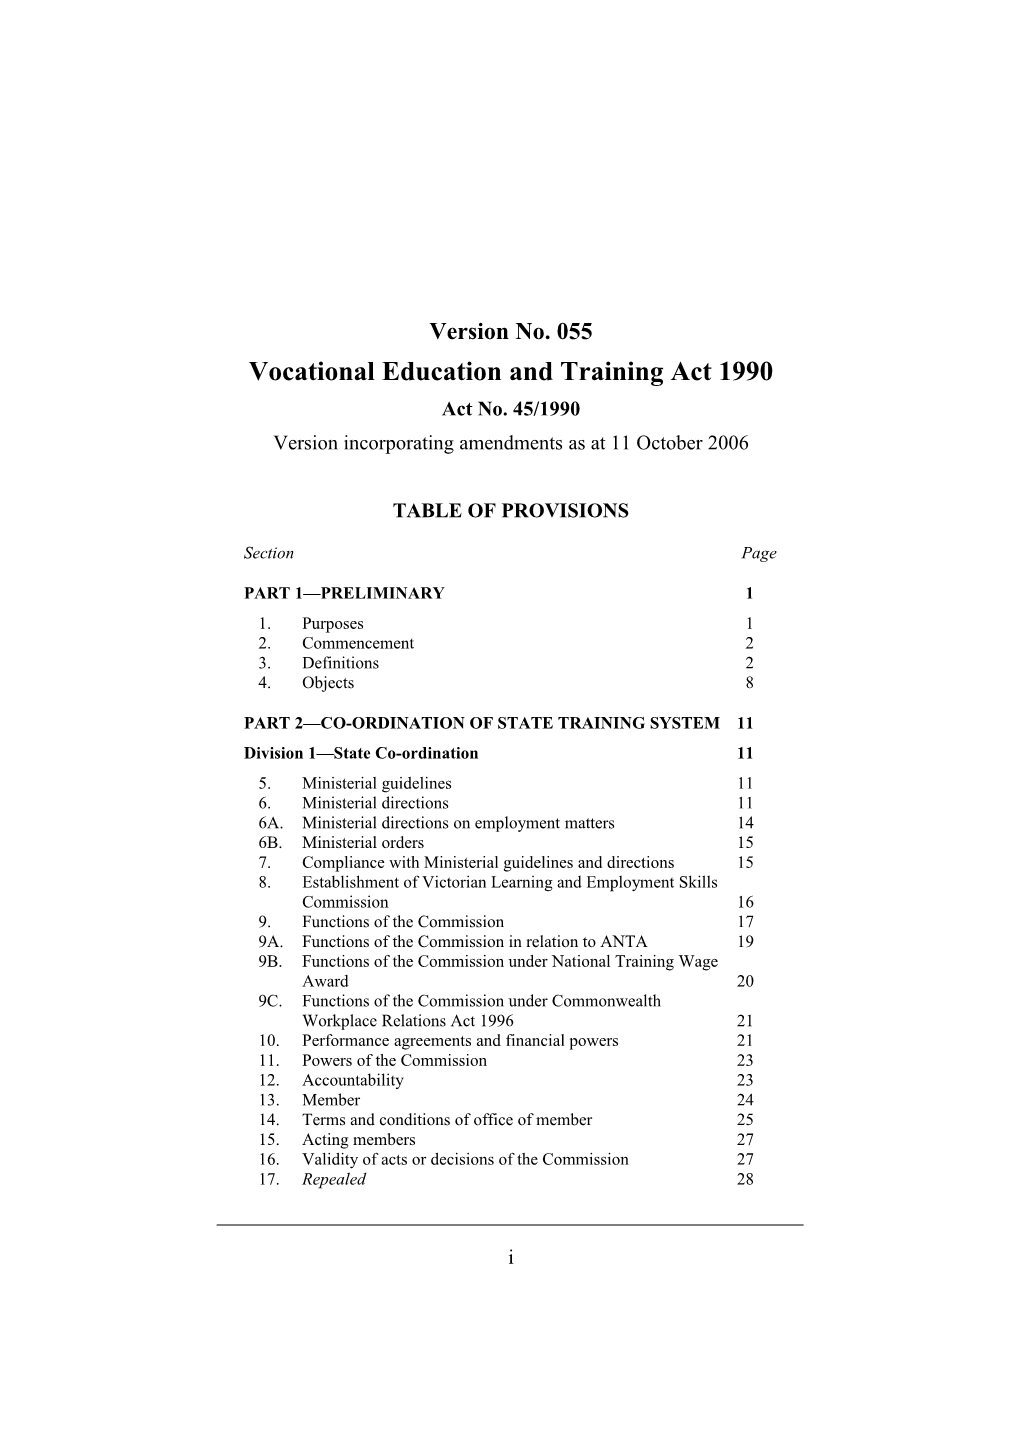 Vocational Education and Training Act 1990